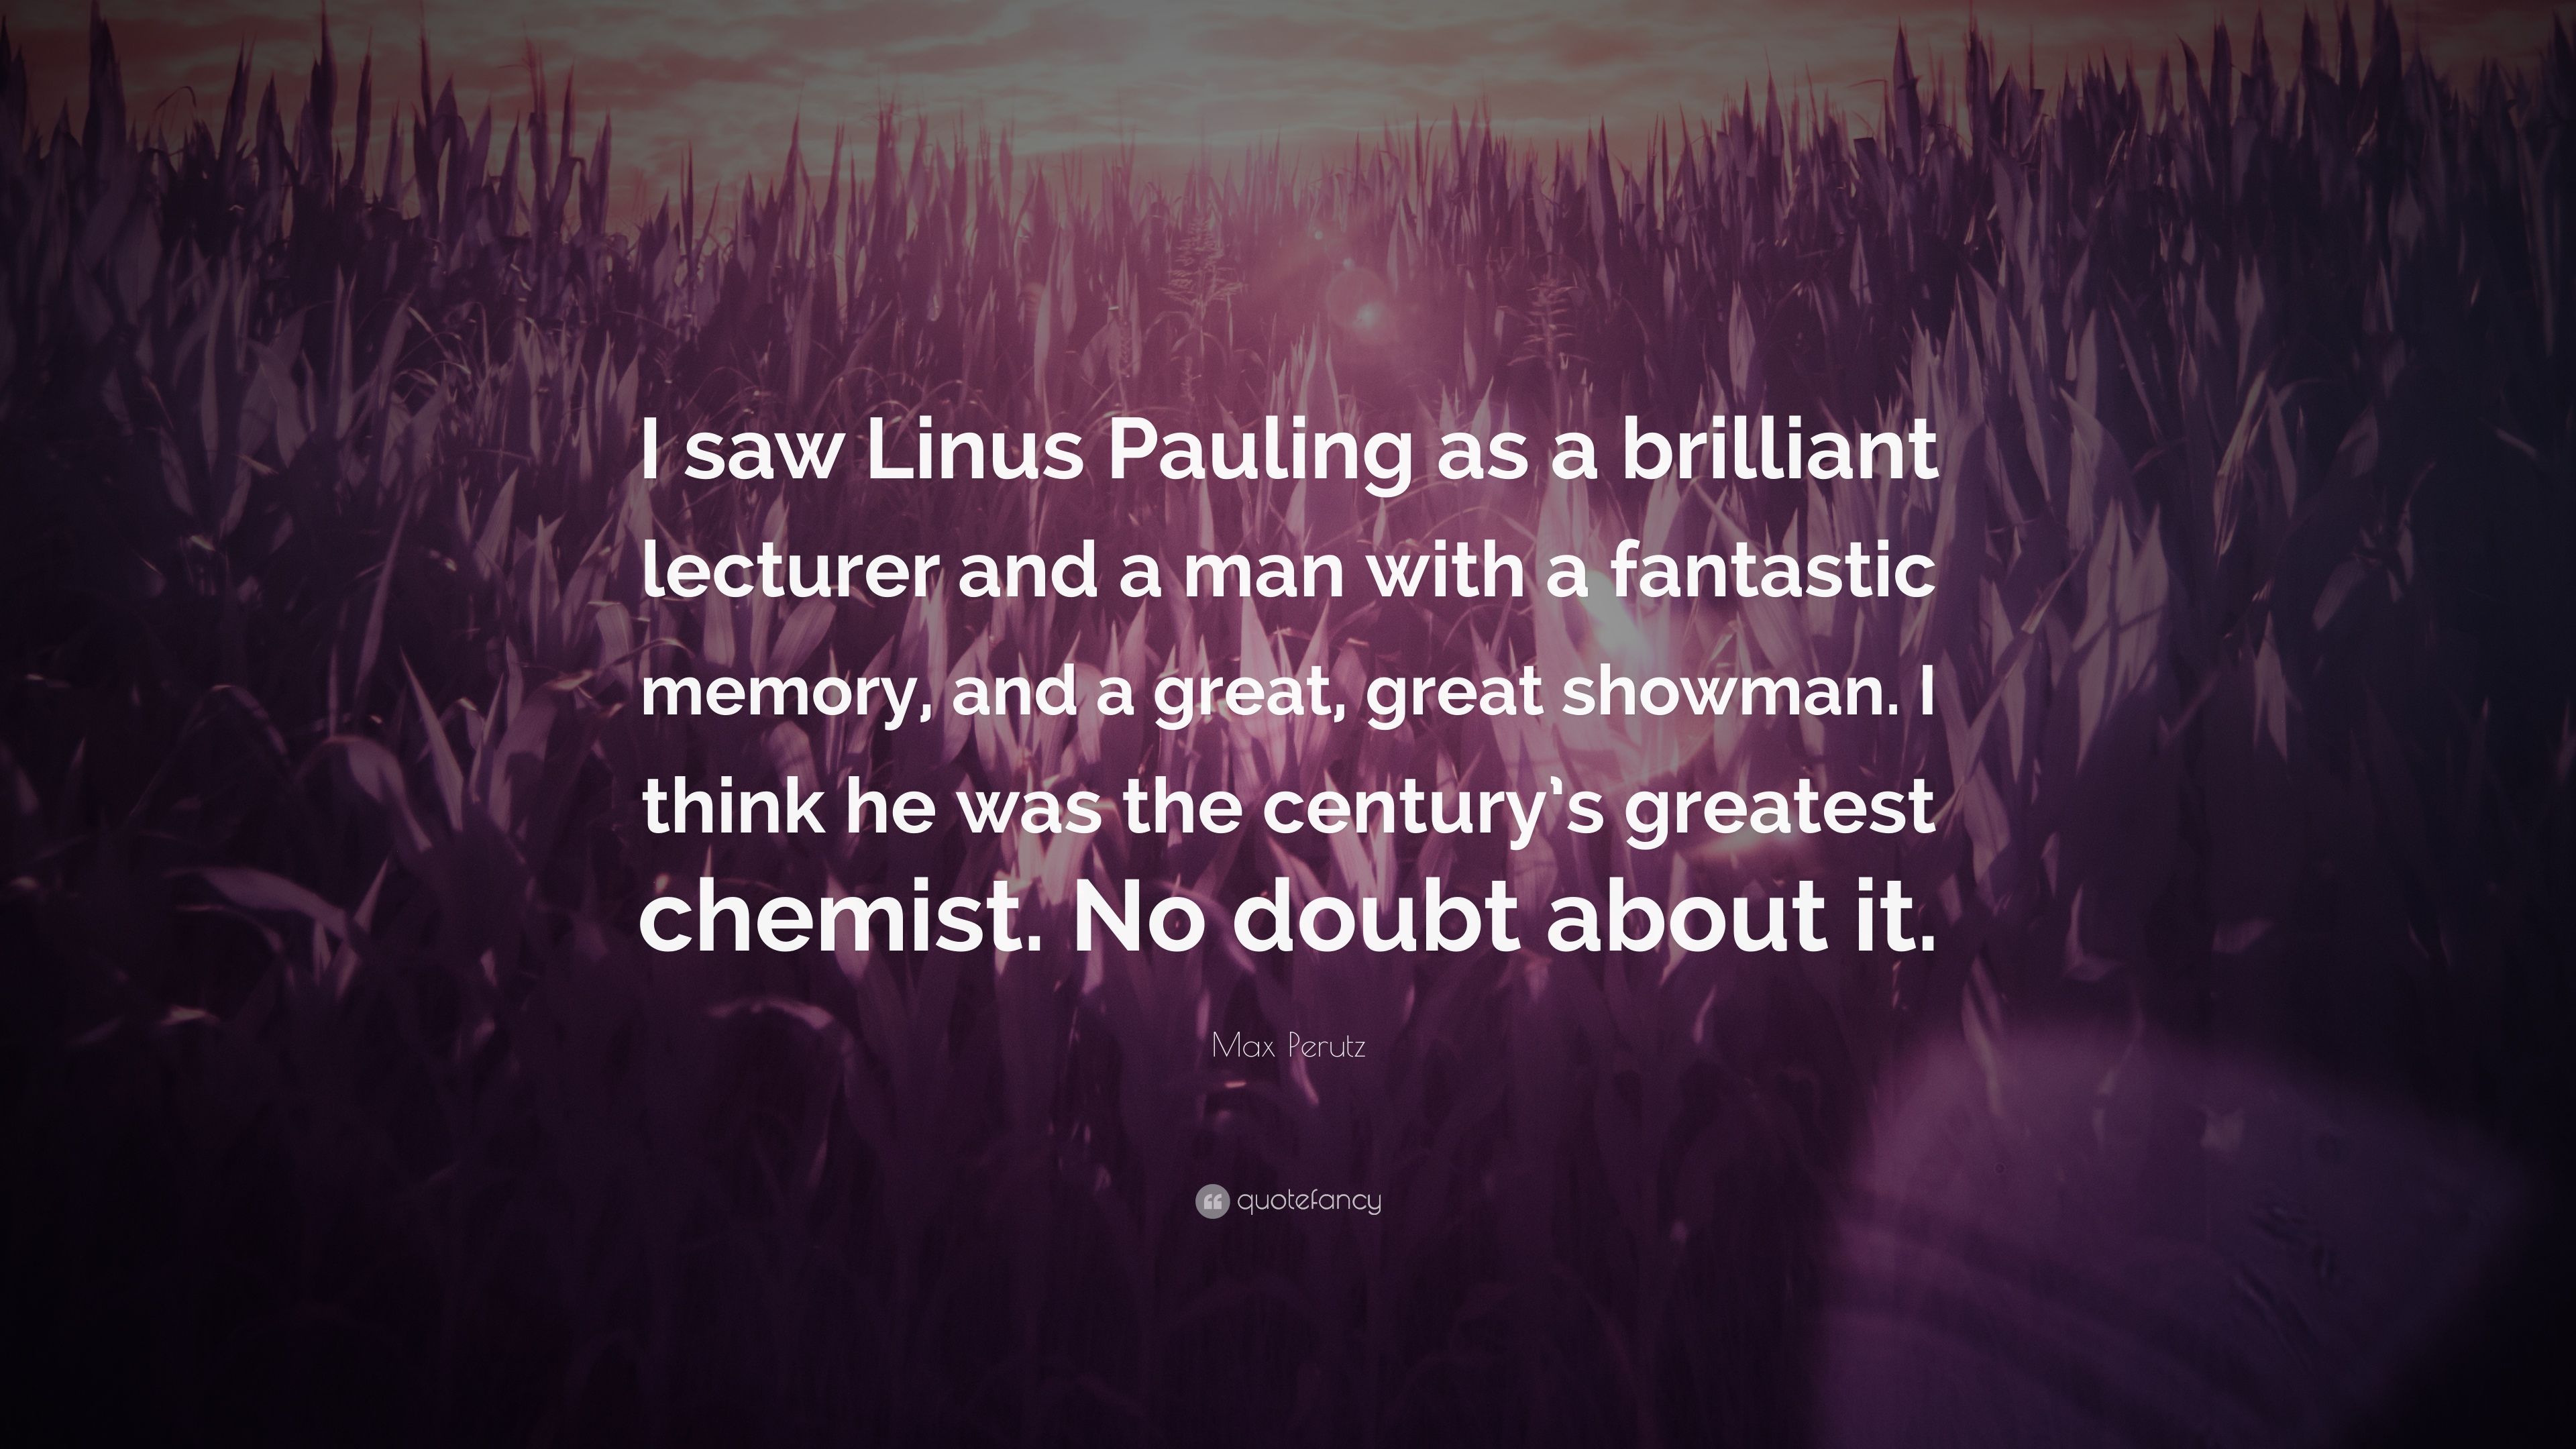 Max Perutz Quote: “I saw Linus Pauling as a brilliant lecturer and a man with a fantastic memory, and a great, great showman. I think he wa.” (7 wallpaper)